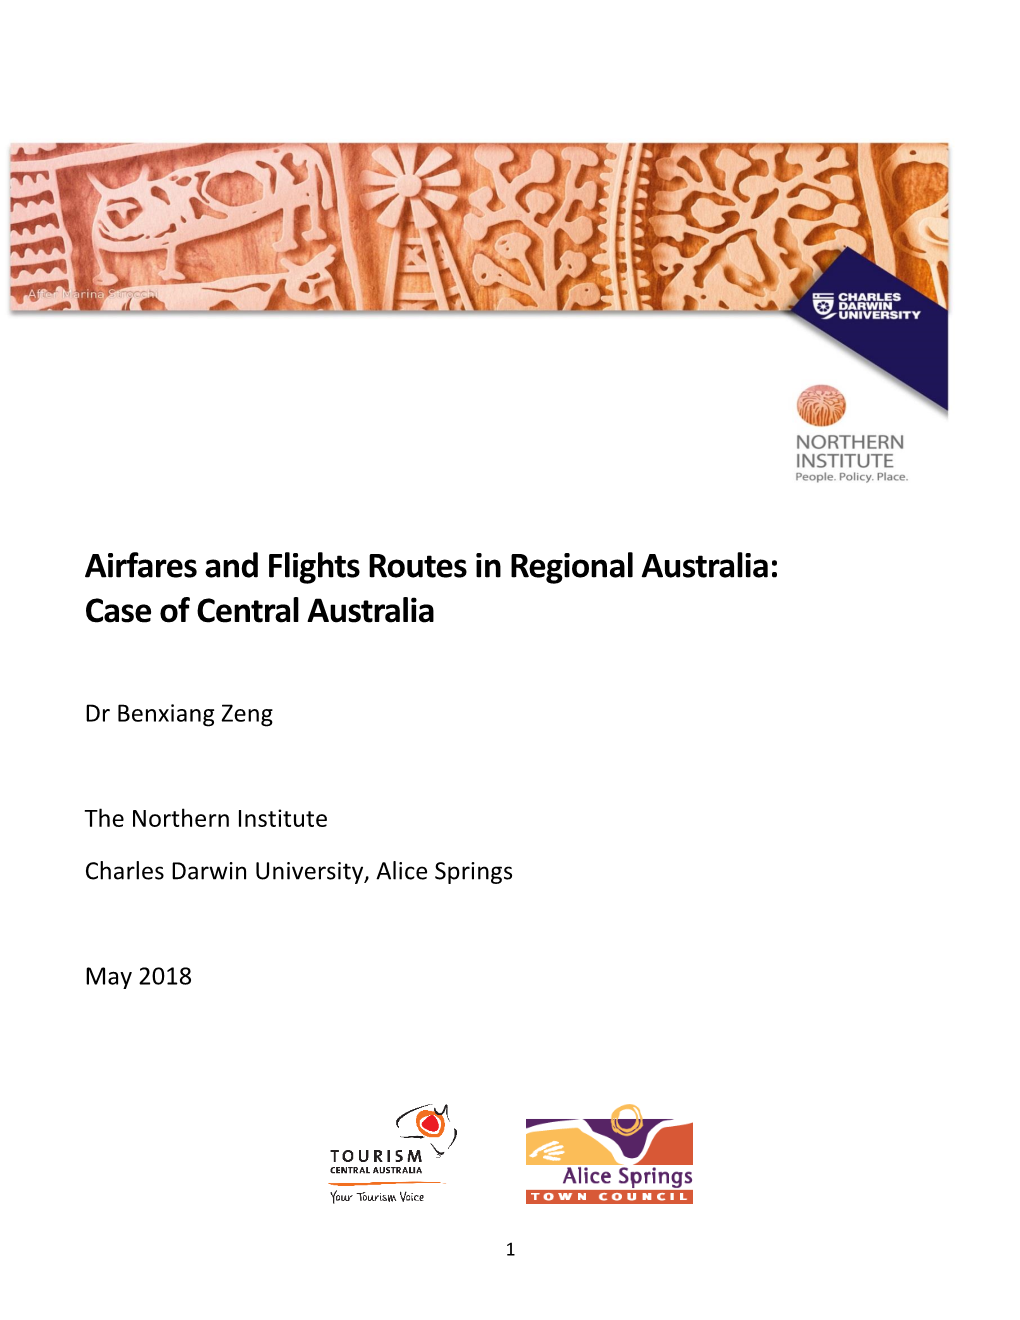 Airfares and Flights Routes in Regional Australia: Case of Central Australia